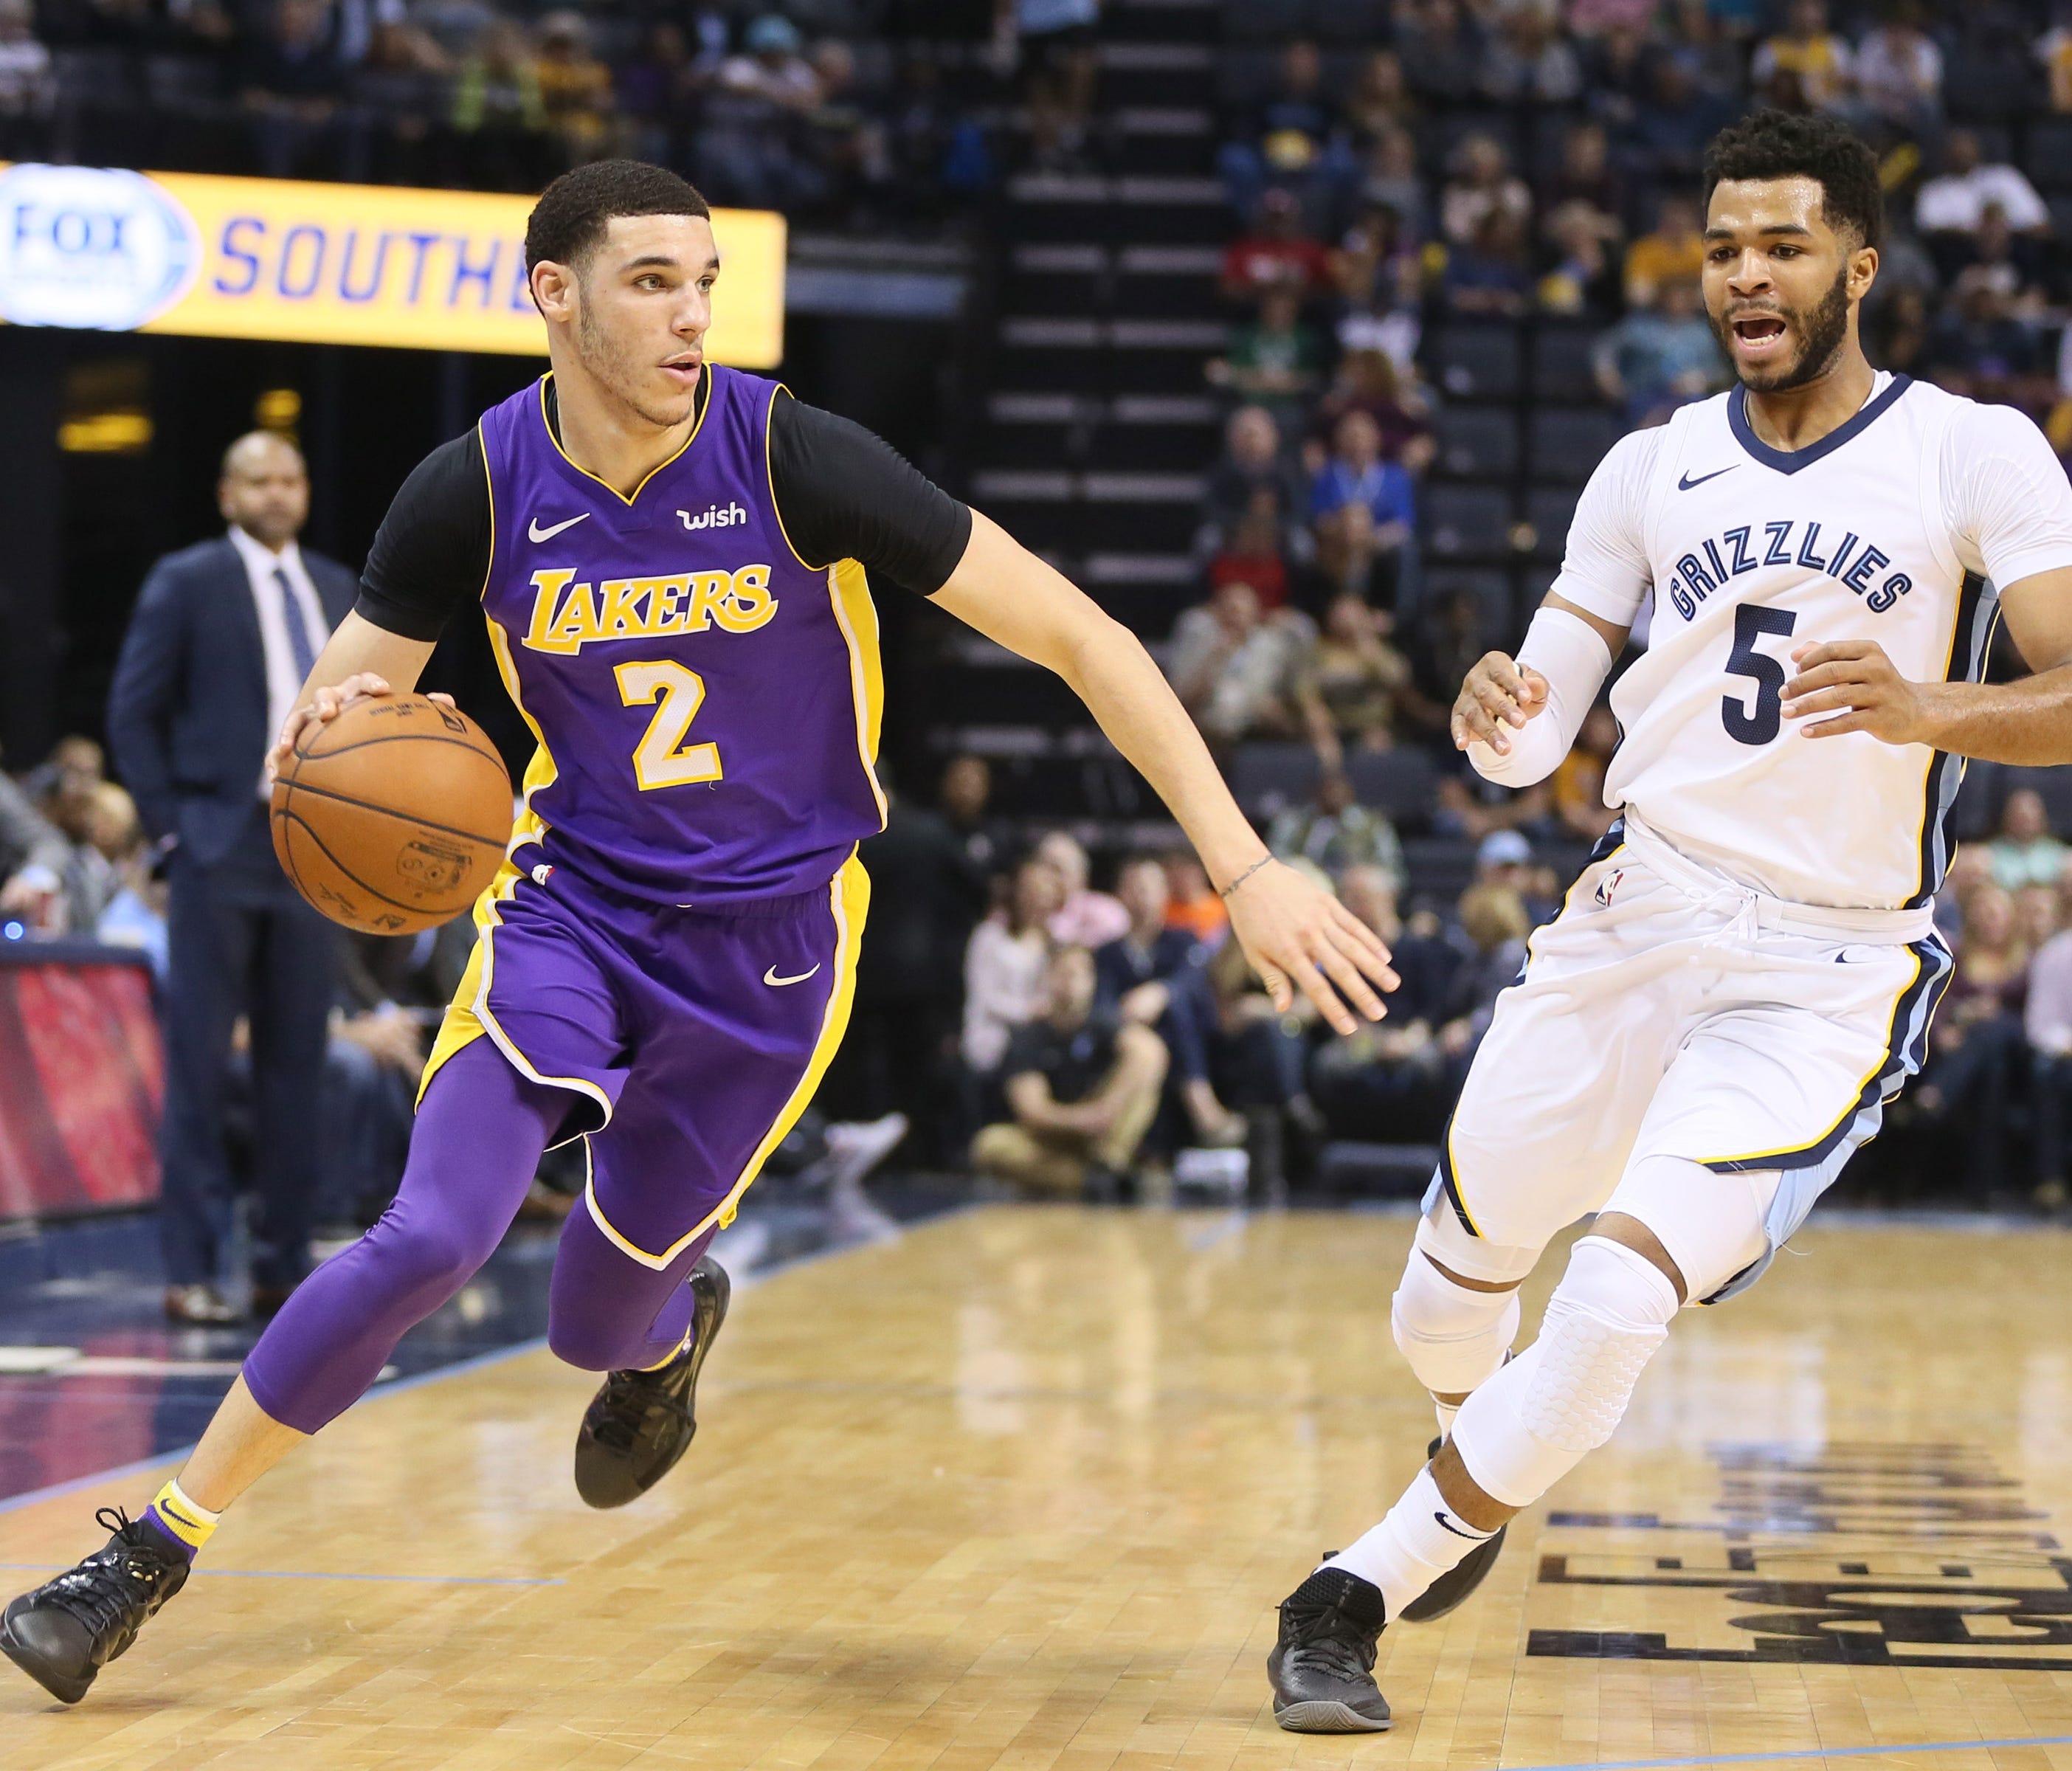 Los Angeles Lakers guard Lonzo Ball (2) drives against Memphis Grizzlies guard Andrew Harrison (5) in the first quarter at FedExForum.